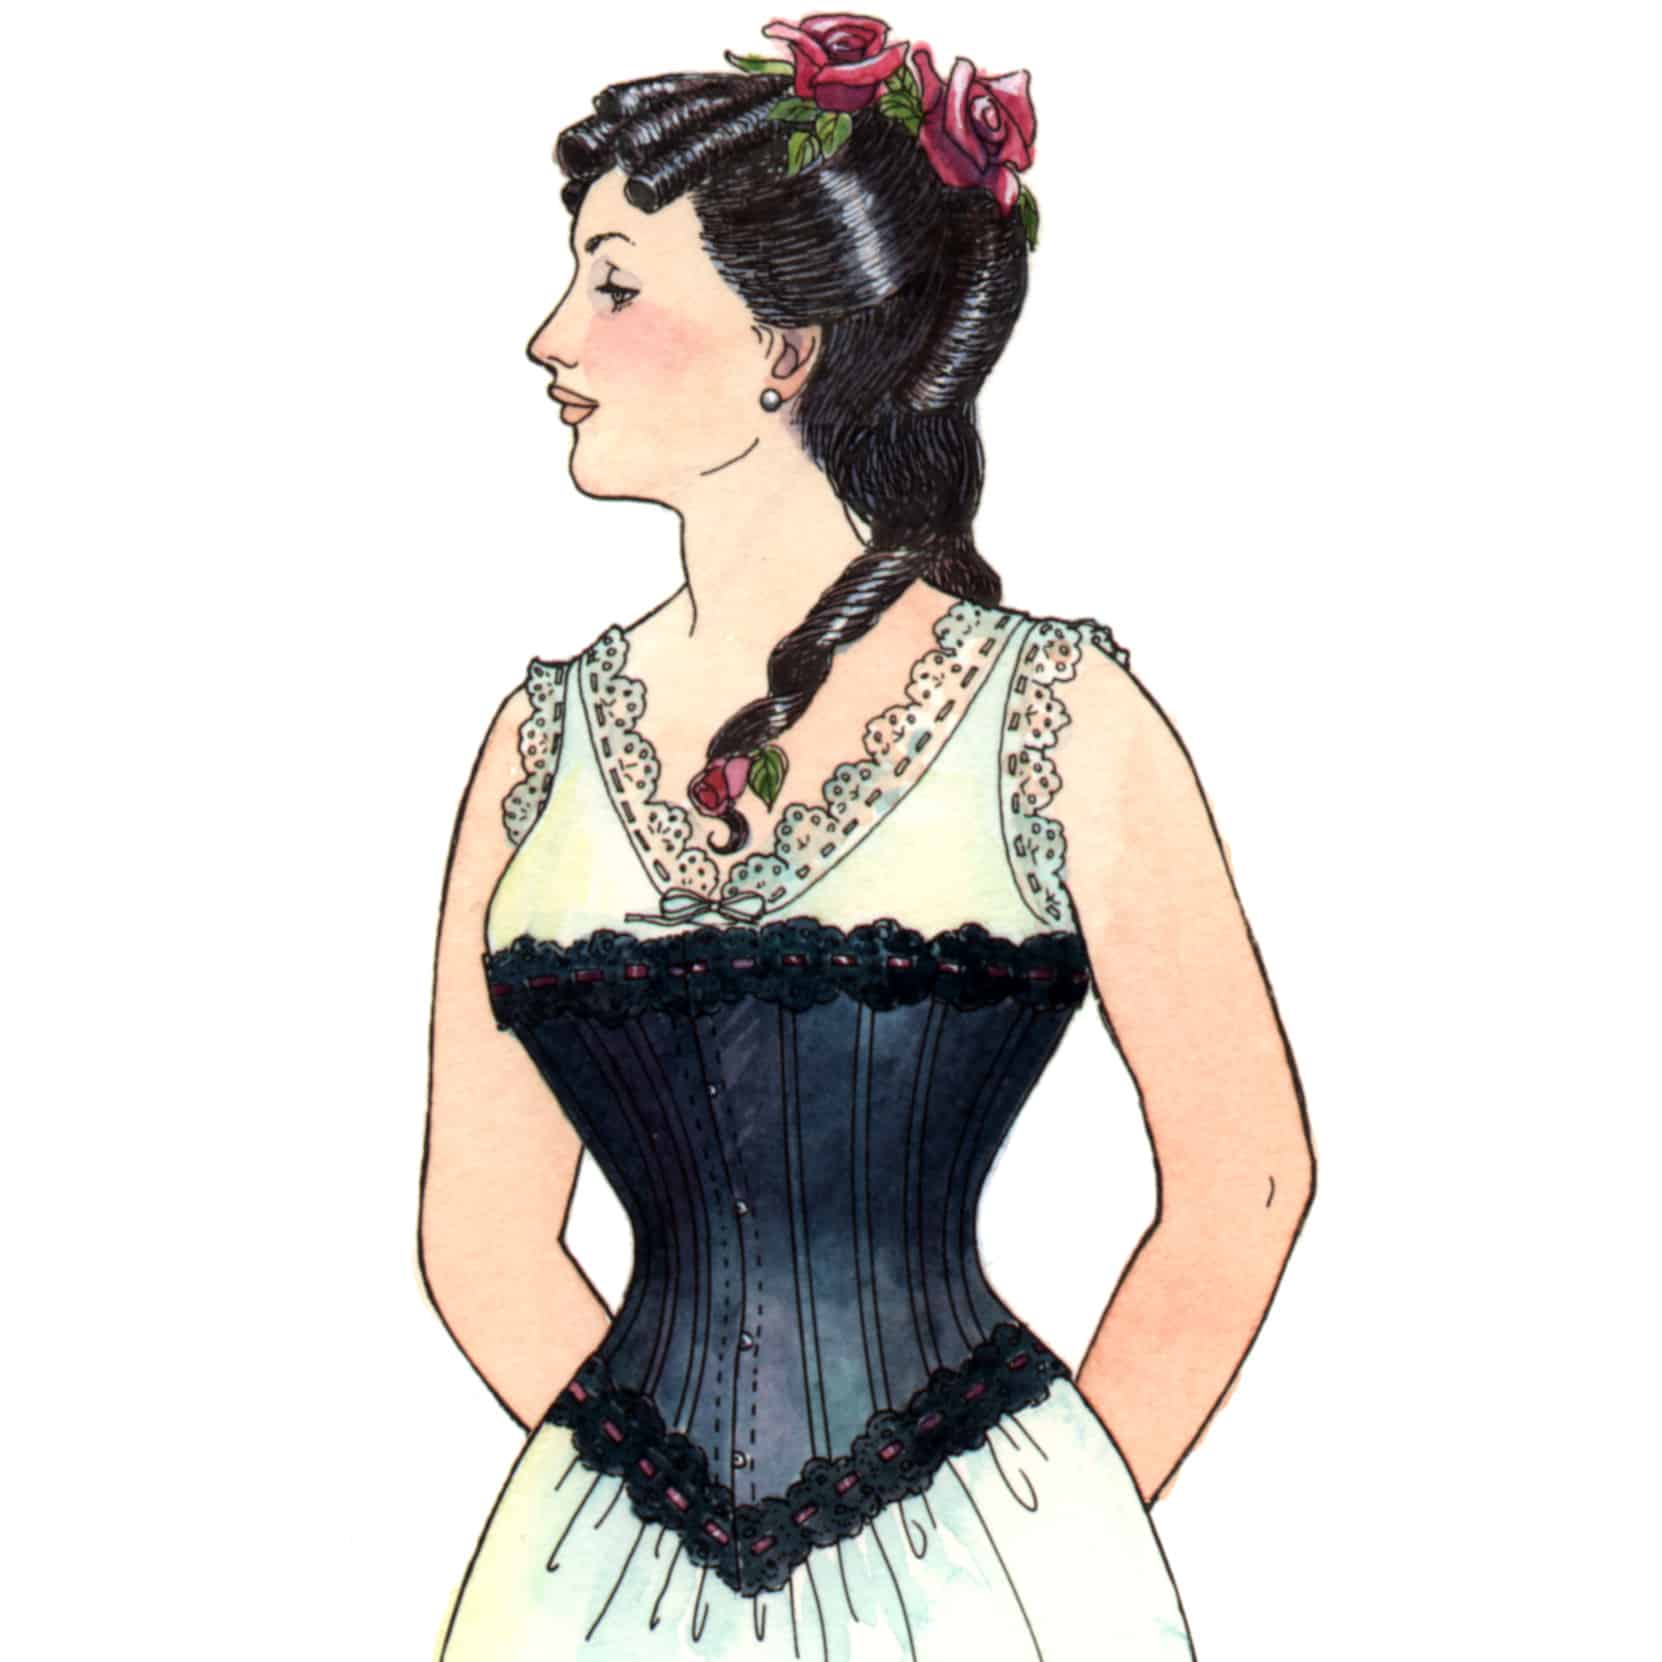 Where to find a free pattern for this type of cupped bustier